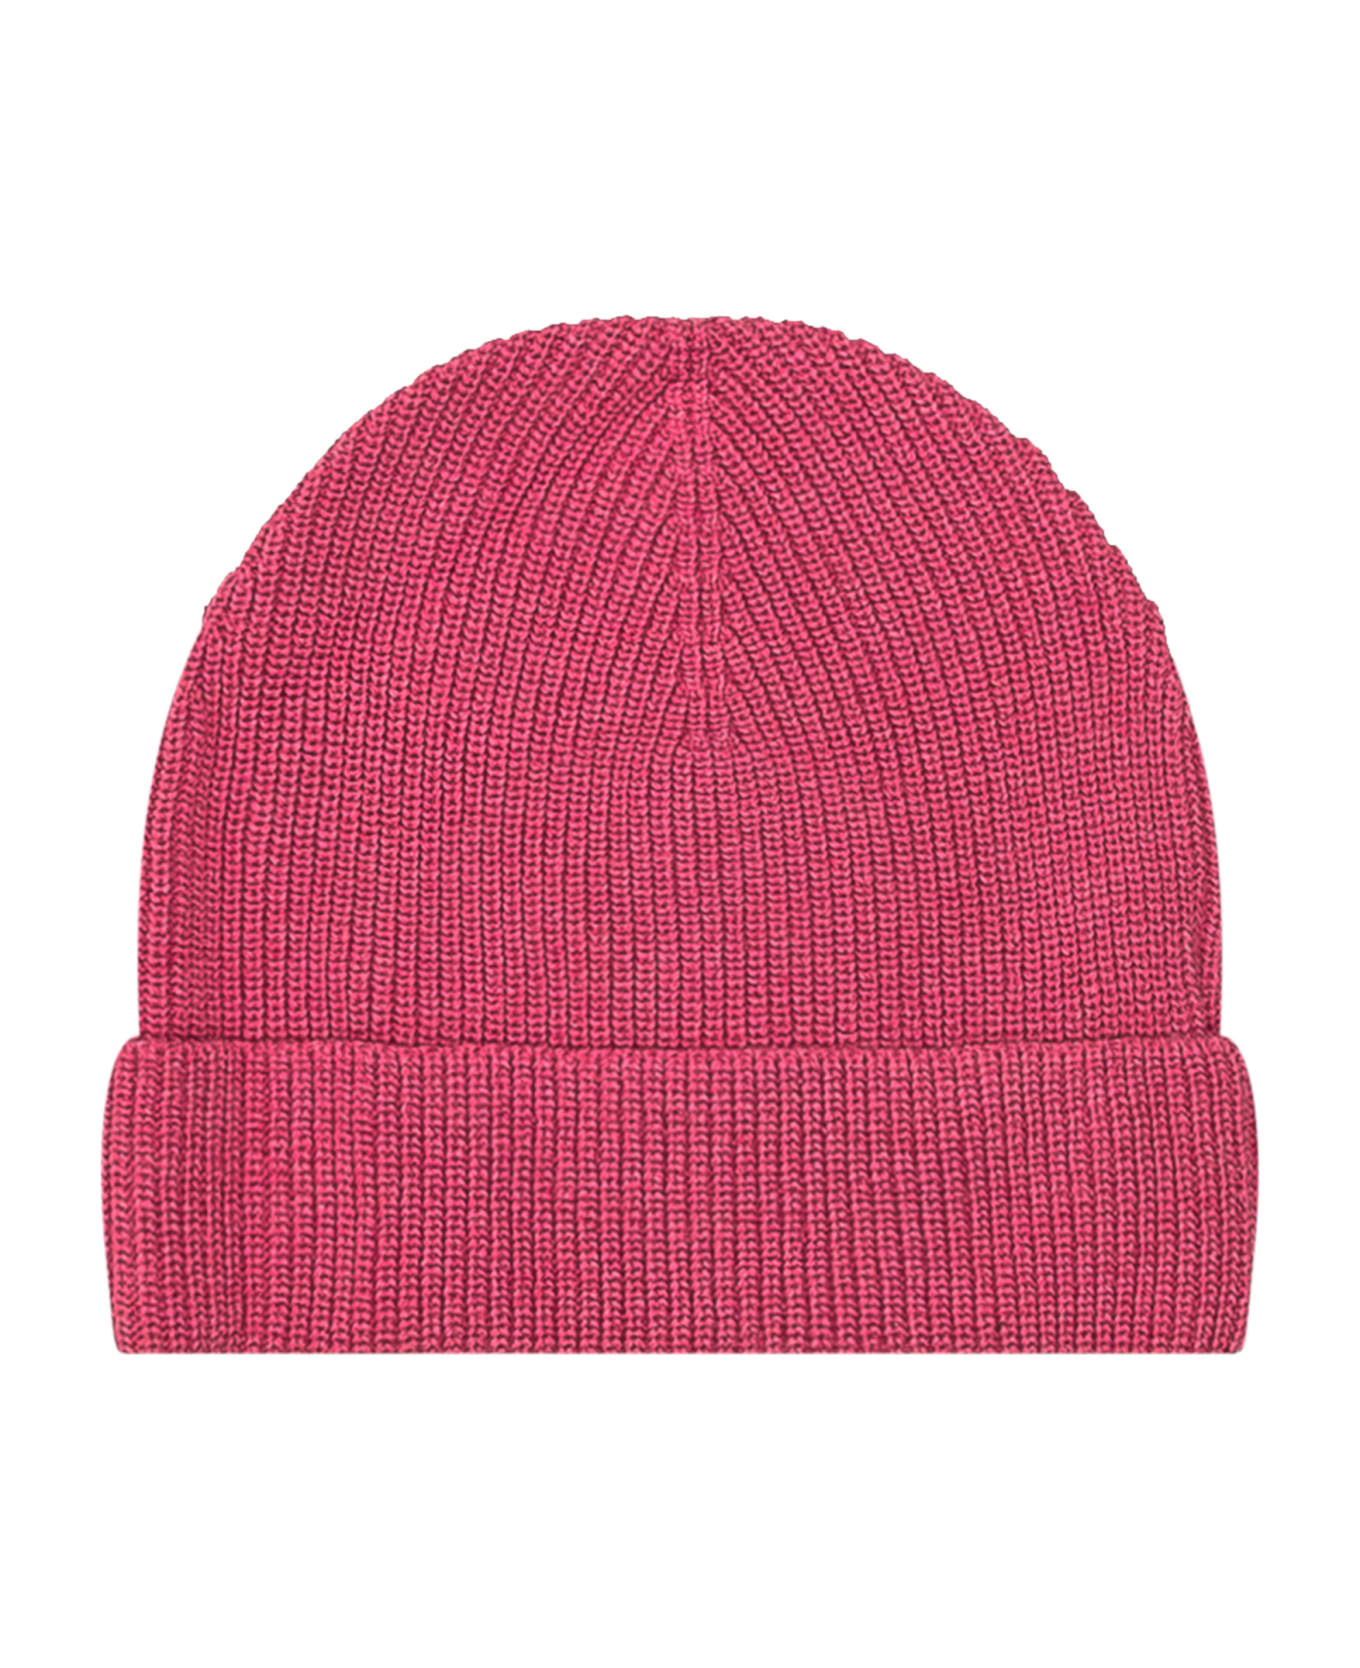 Palm Angels Hat With Logo - FUCHSIA WH